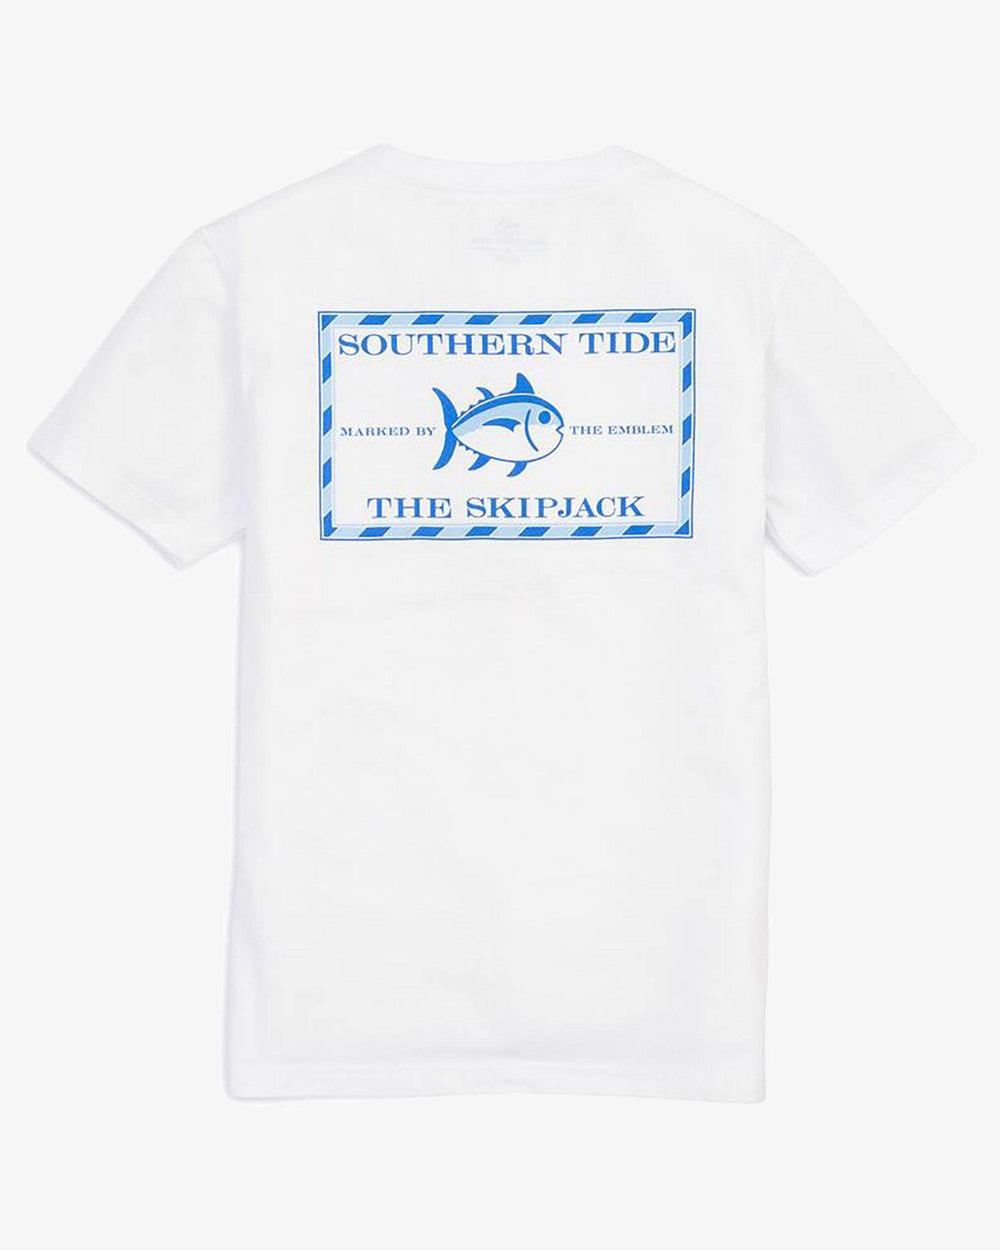 The back view of the Kid's White Original Skipjack T-Shirt by Southern Tide - Classic White